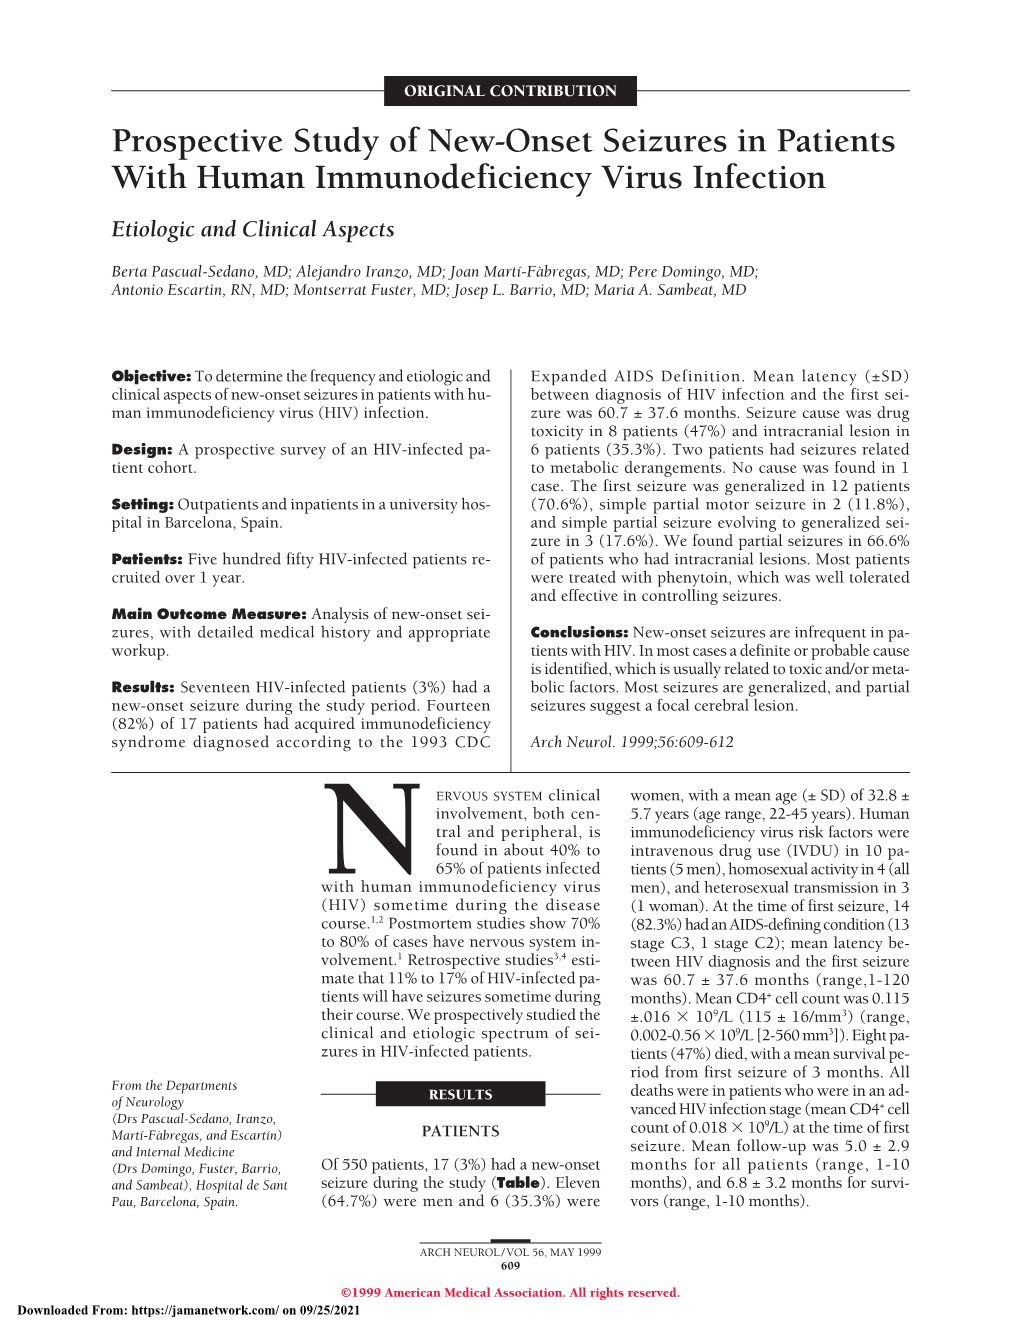 Prospective Study of New-Onset Seizures in Patients with Human Immunodeficiency Virus Infection Etiologic and Clinical Aspects